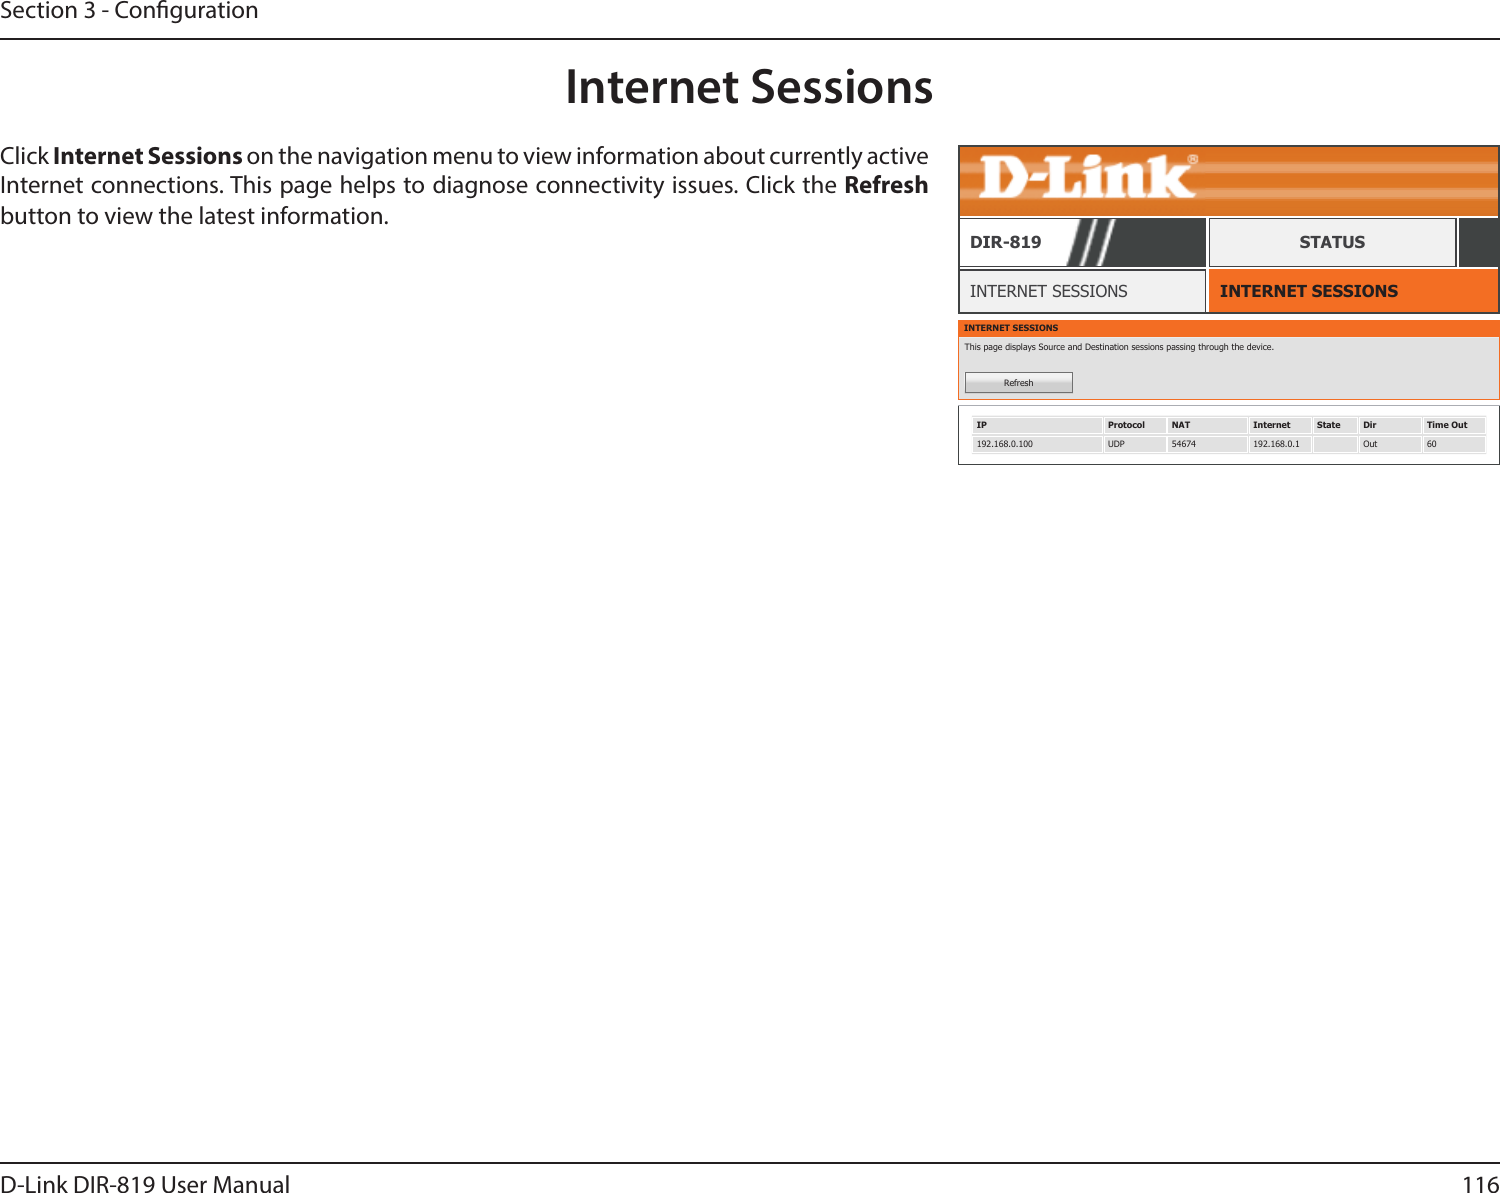 116D-Link DIR-819 User ManualSection 3 - CongurationInternet SessionsINTERNET SESSIONSINTERNET SESSIONSDIR-819 STATUSClick Internet Sessions on the navigation menu to view information about currently active Internet connections. This page helps to diagnose connectivity issues. Click the Refresh button to view the latest information.INTERNET SESSIONSThis page displays Source and Destination sessions passing through the device.RefreshIP Protocol NAT Internet State Dir Time Out192.168.0.100 UDP 54674 192.168.0.1 Out 60